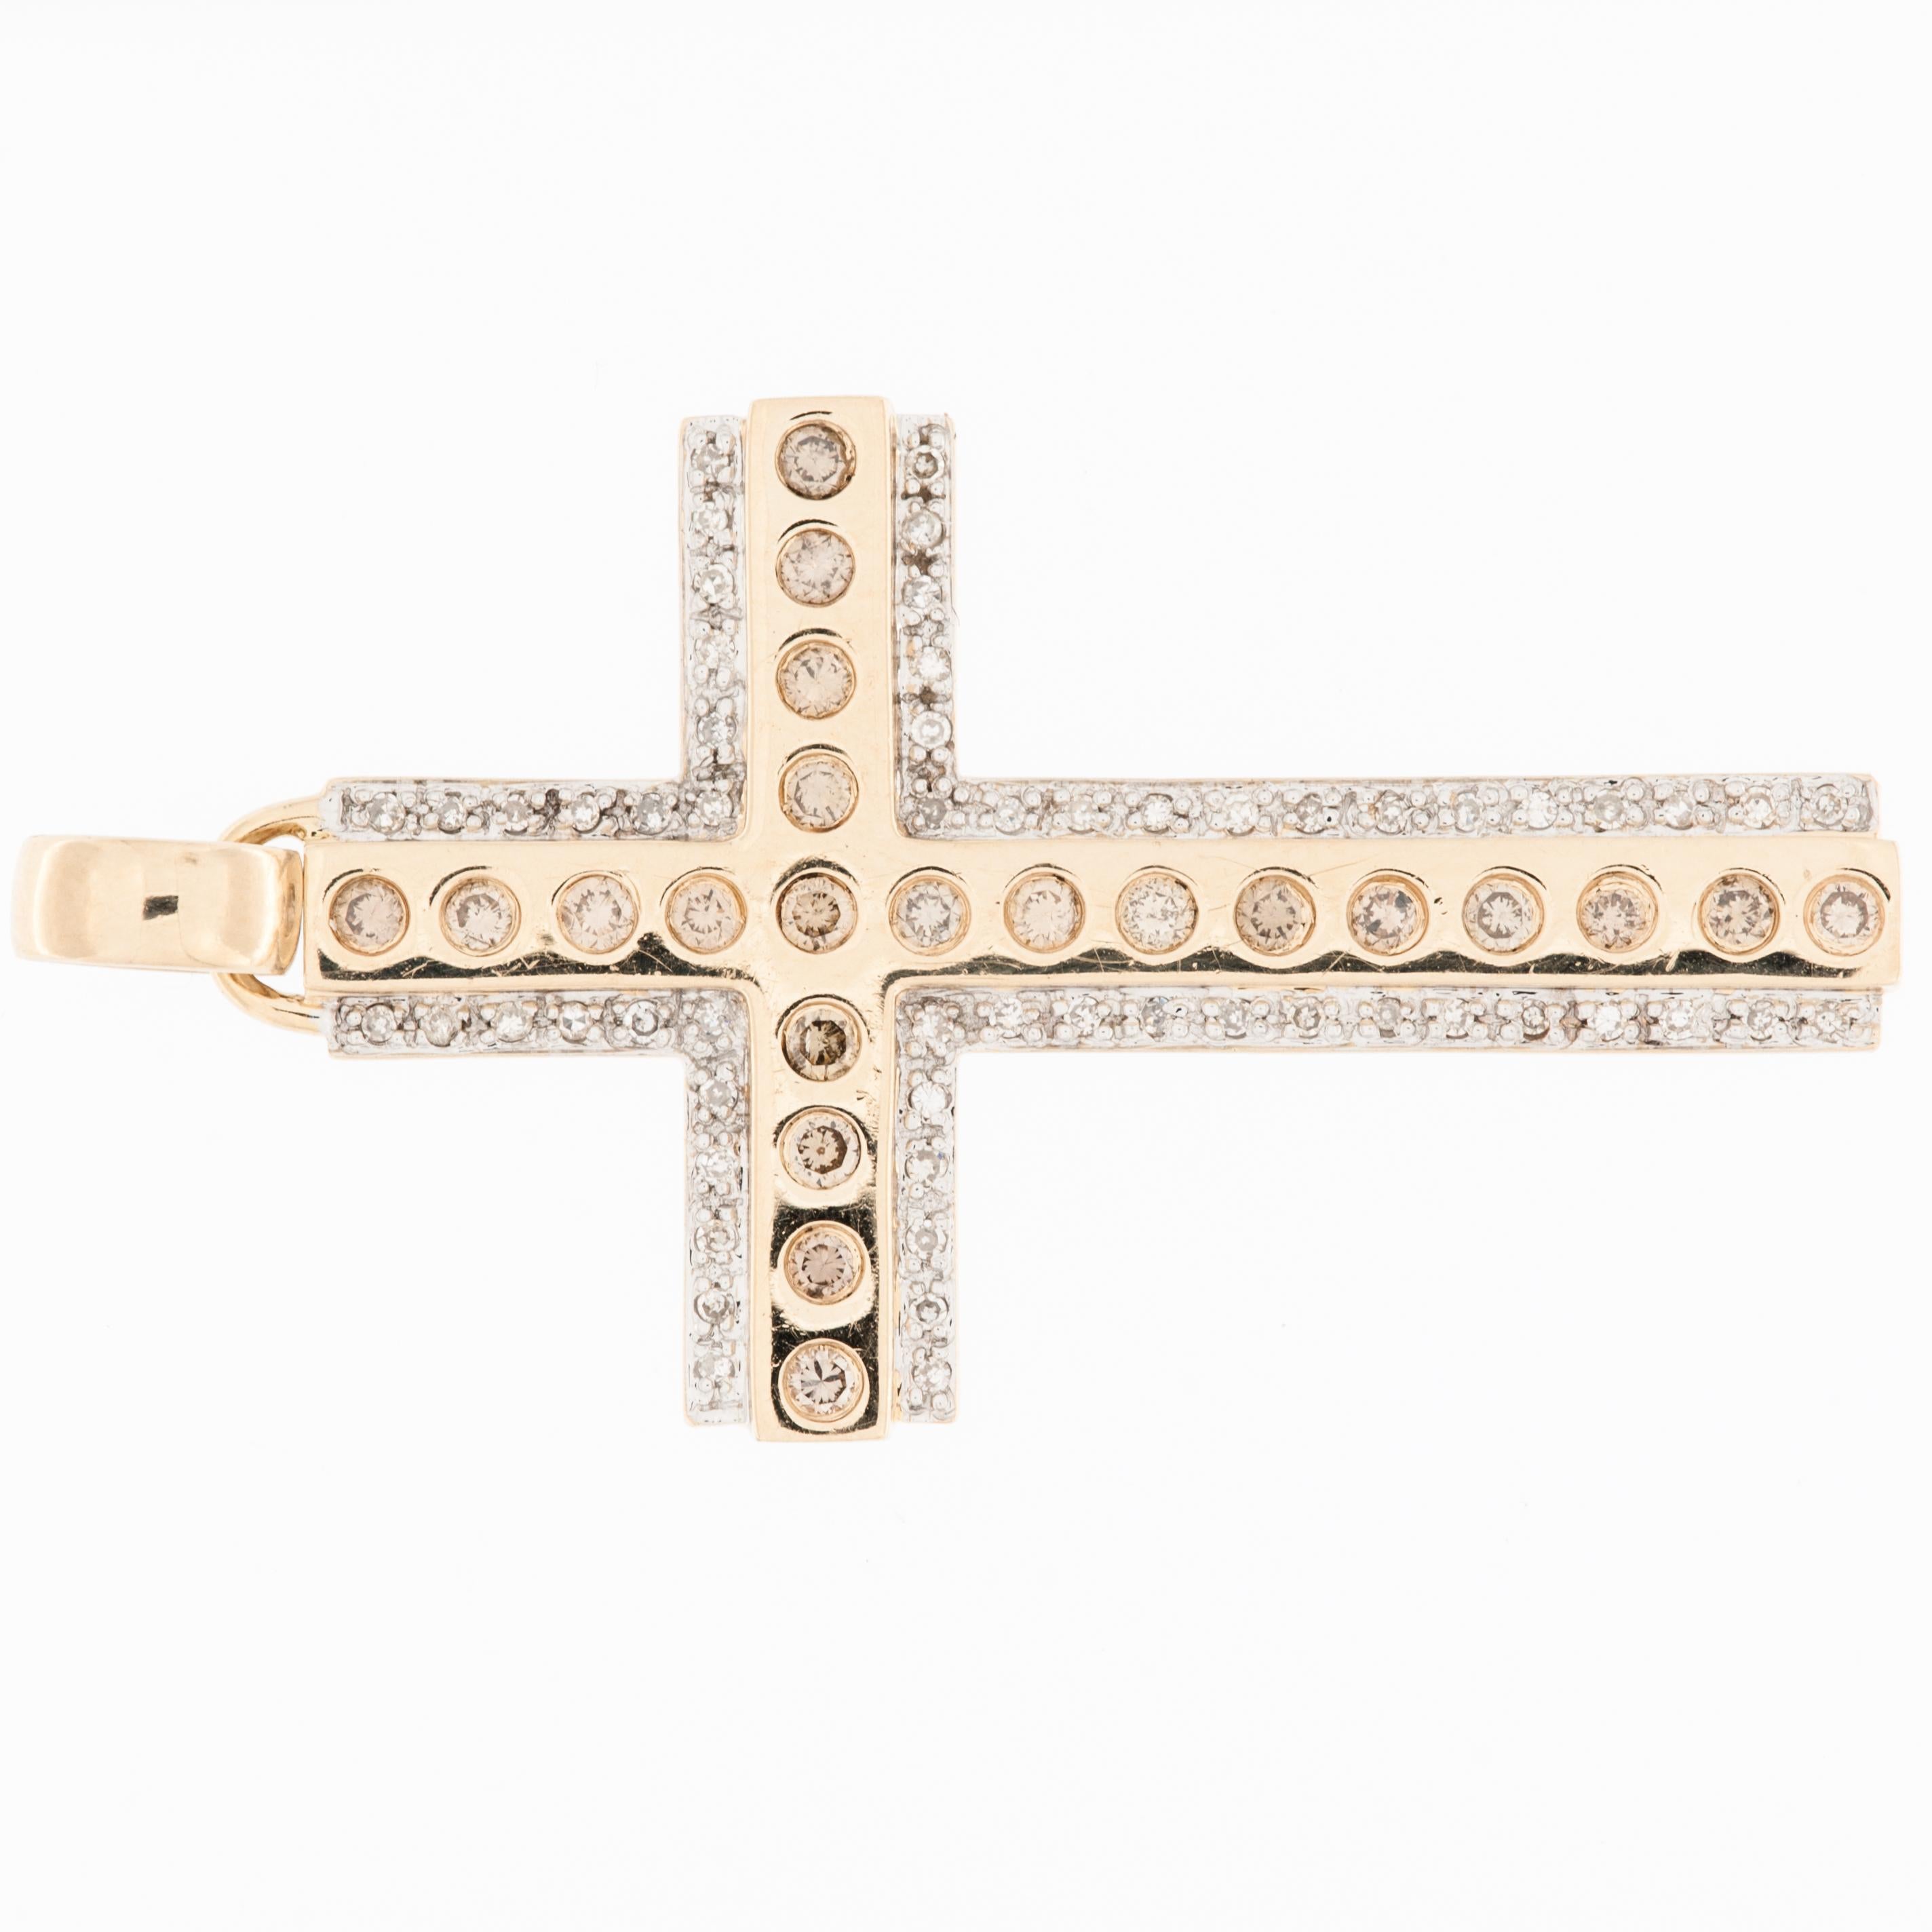 The Vintage 14kt Gold German Cross with Diamonds is a unique and intricate piece of jewelry that combines traditional craftsmanship with luxurious materials. 

The cross is made of 14-karat gold, which is known for its rich, warm color and